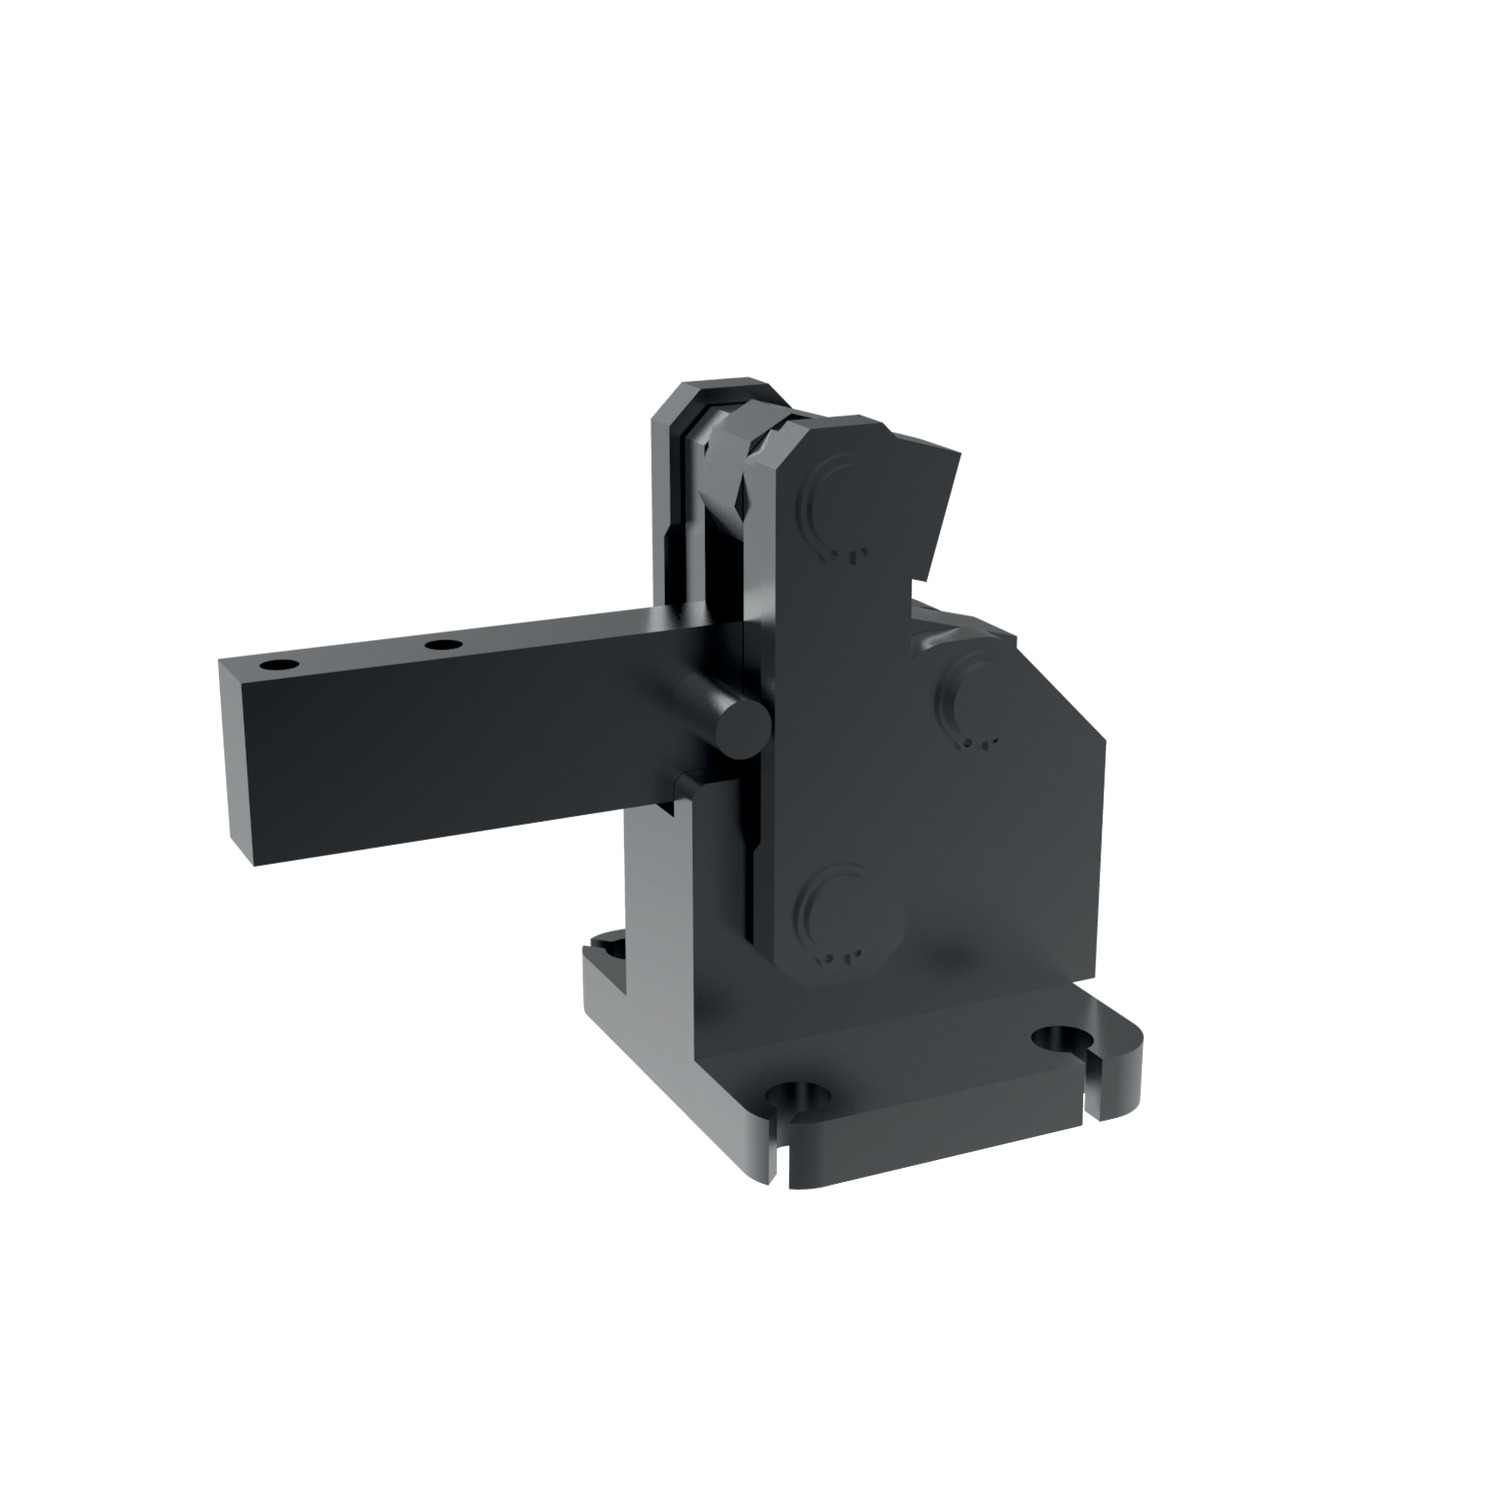 46100 - Heavy Duty Vertical Toggle Clamp